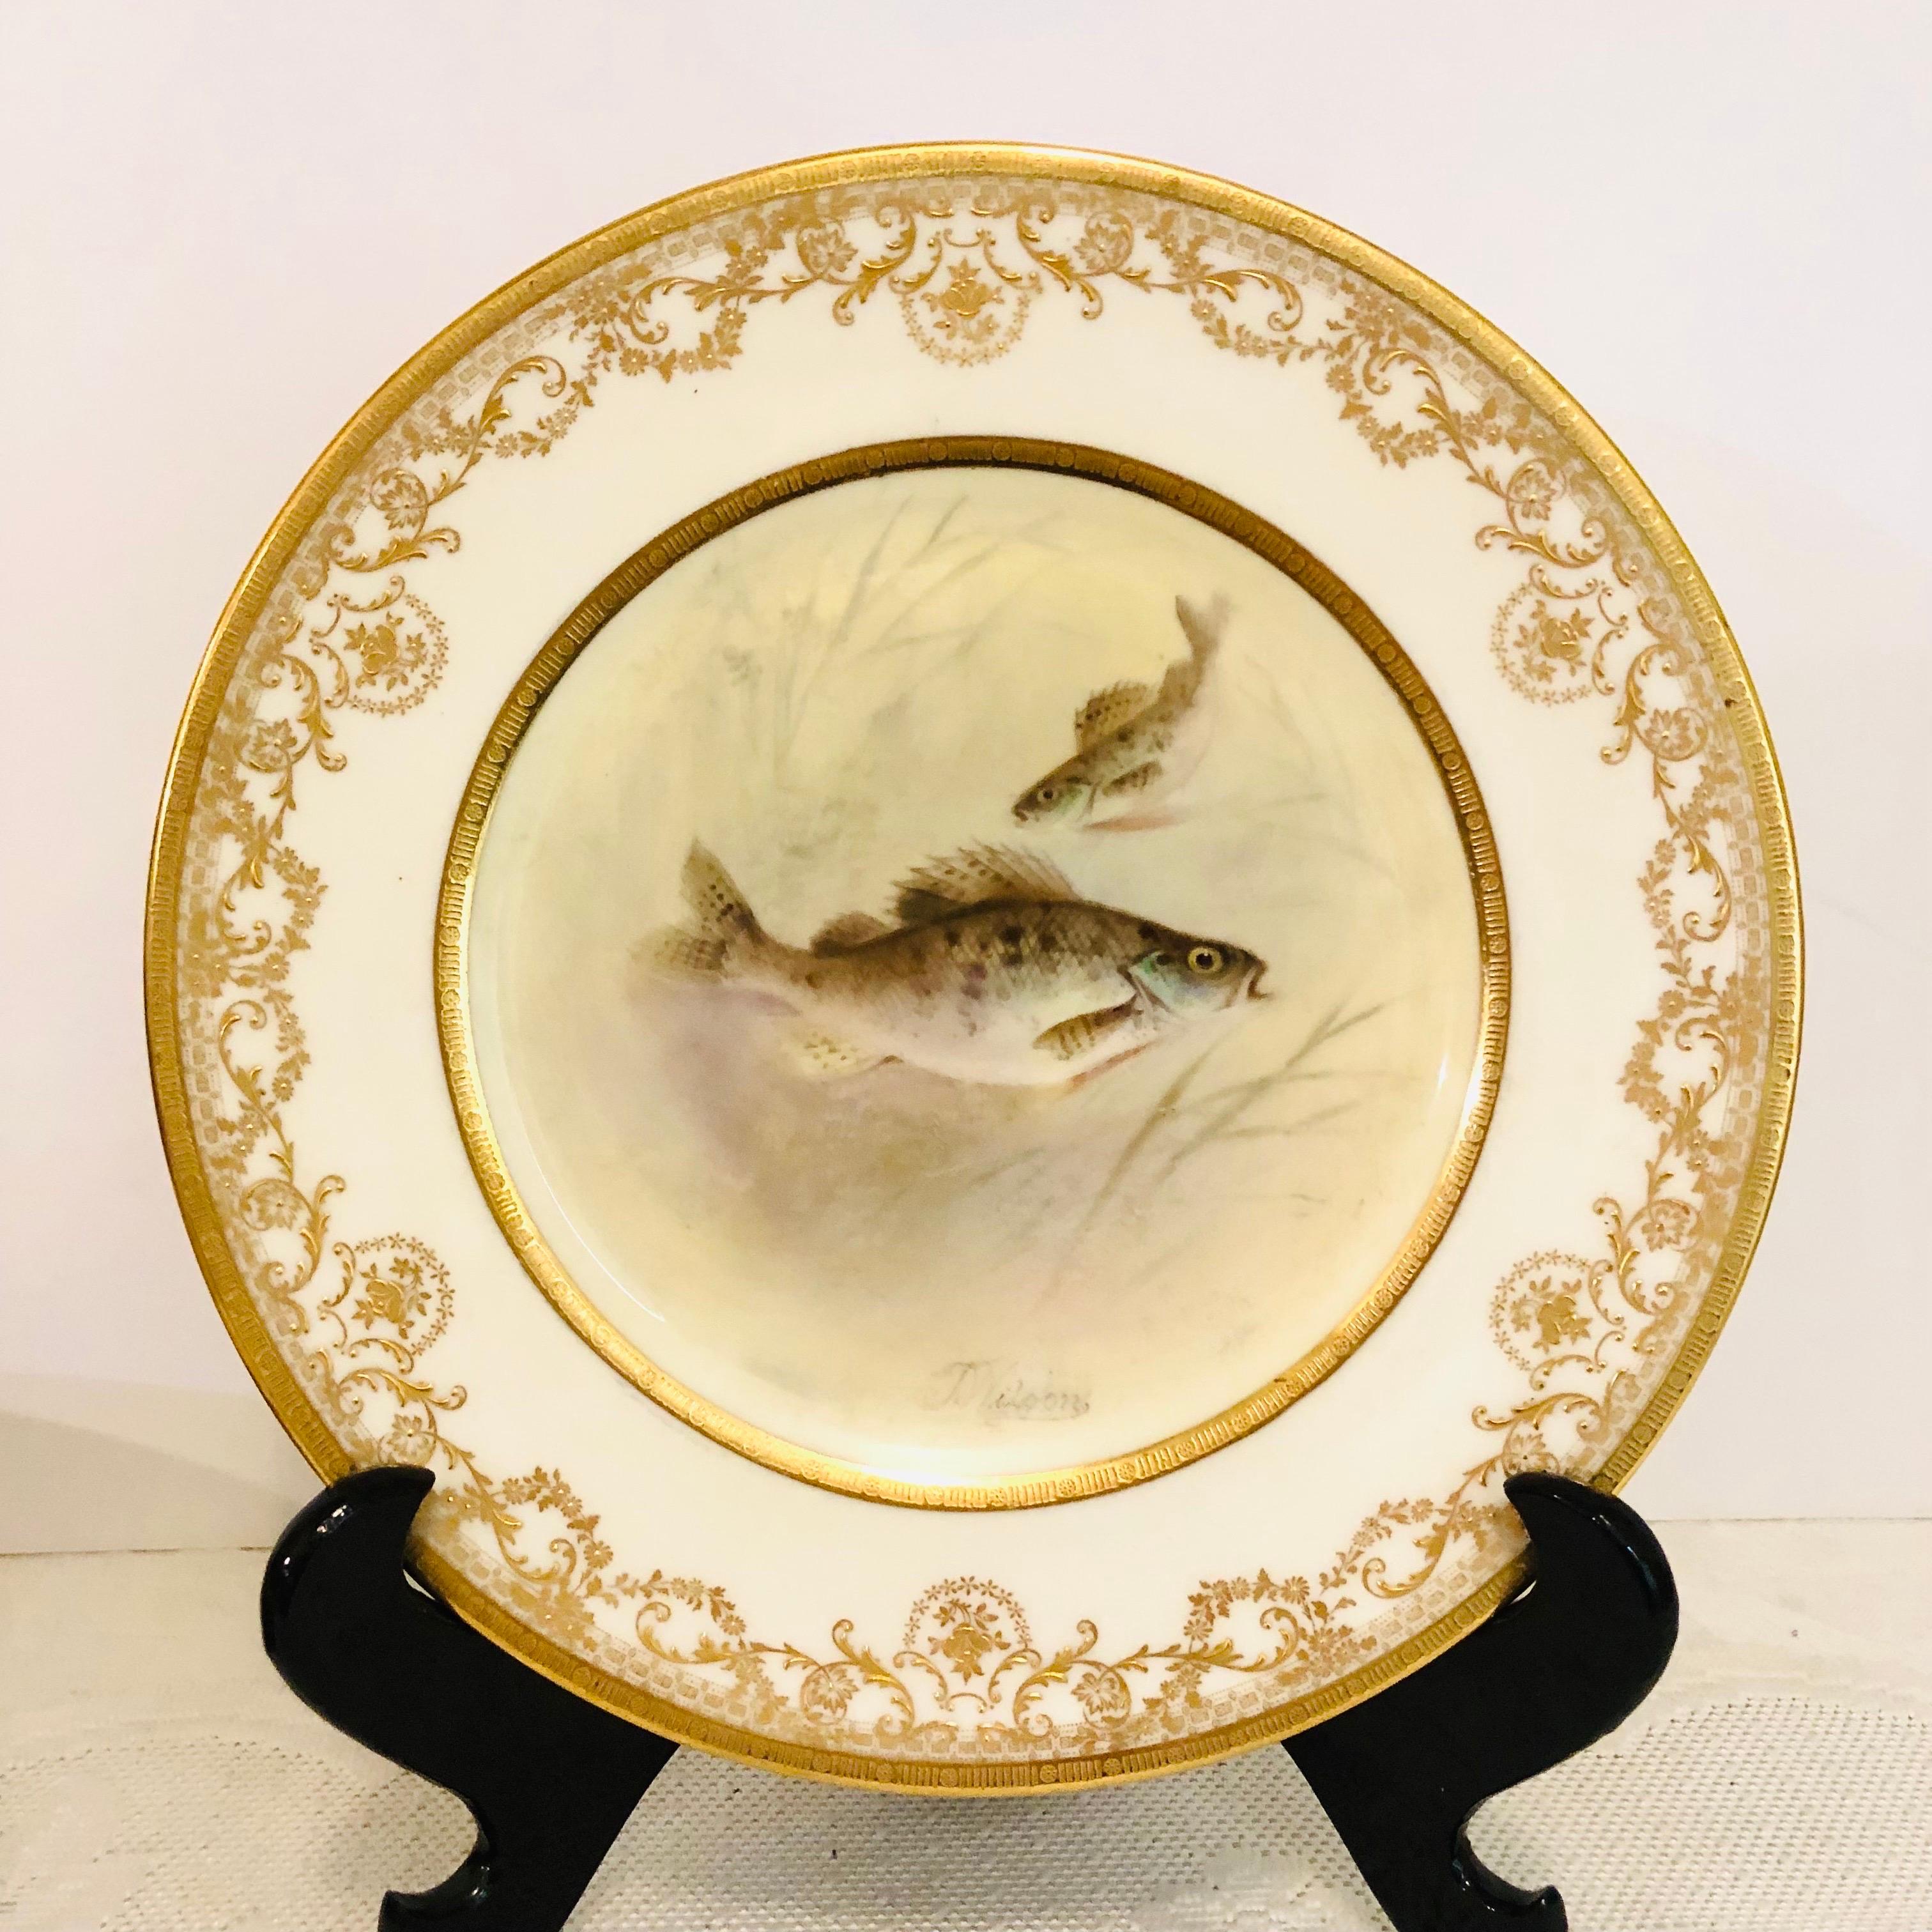 Set of 12 Royal Doulton Fish Plates Each Hand Painted with Different Fish  6